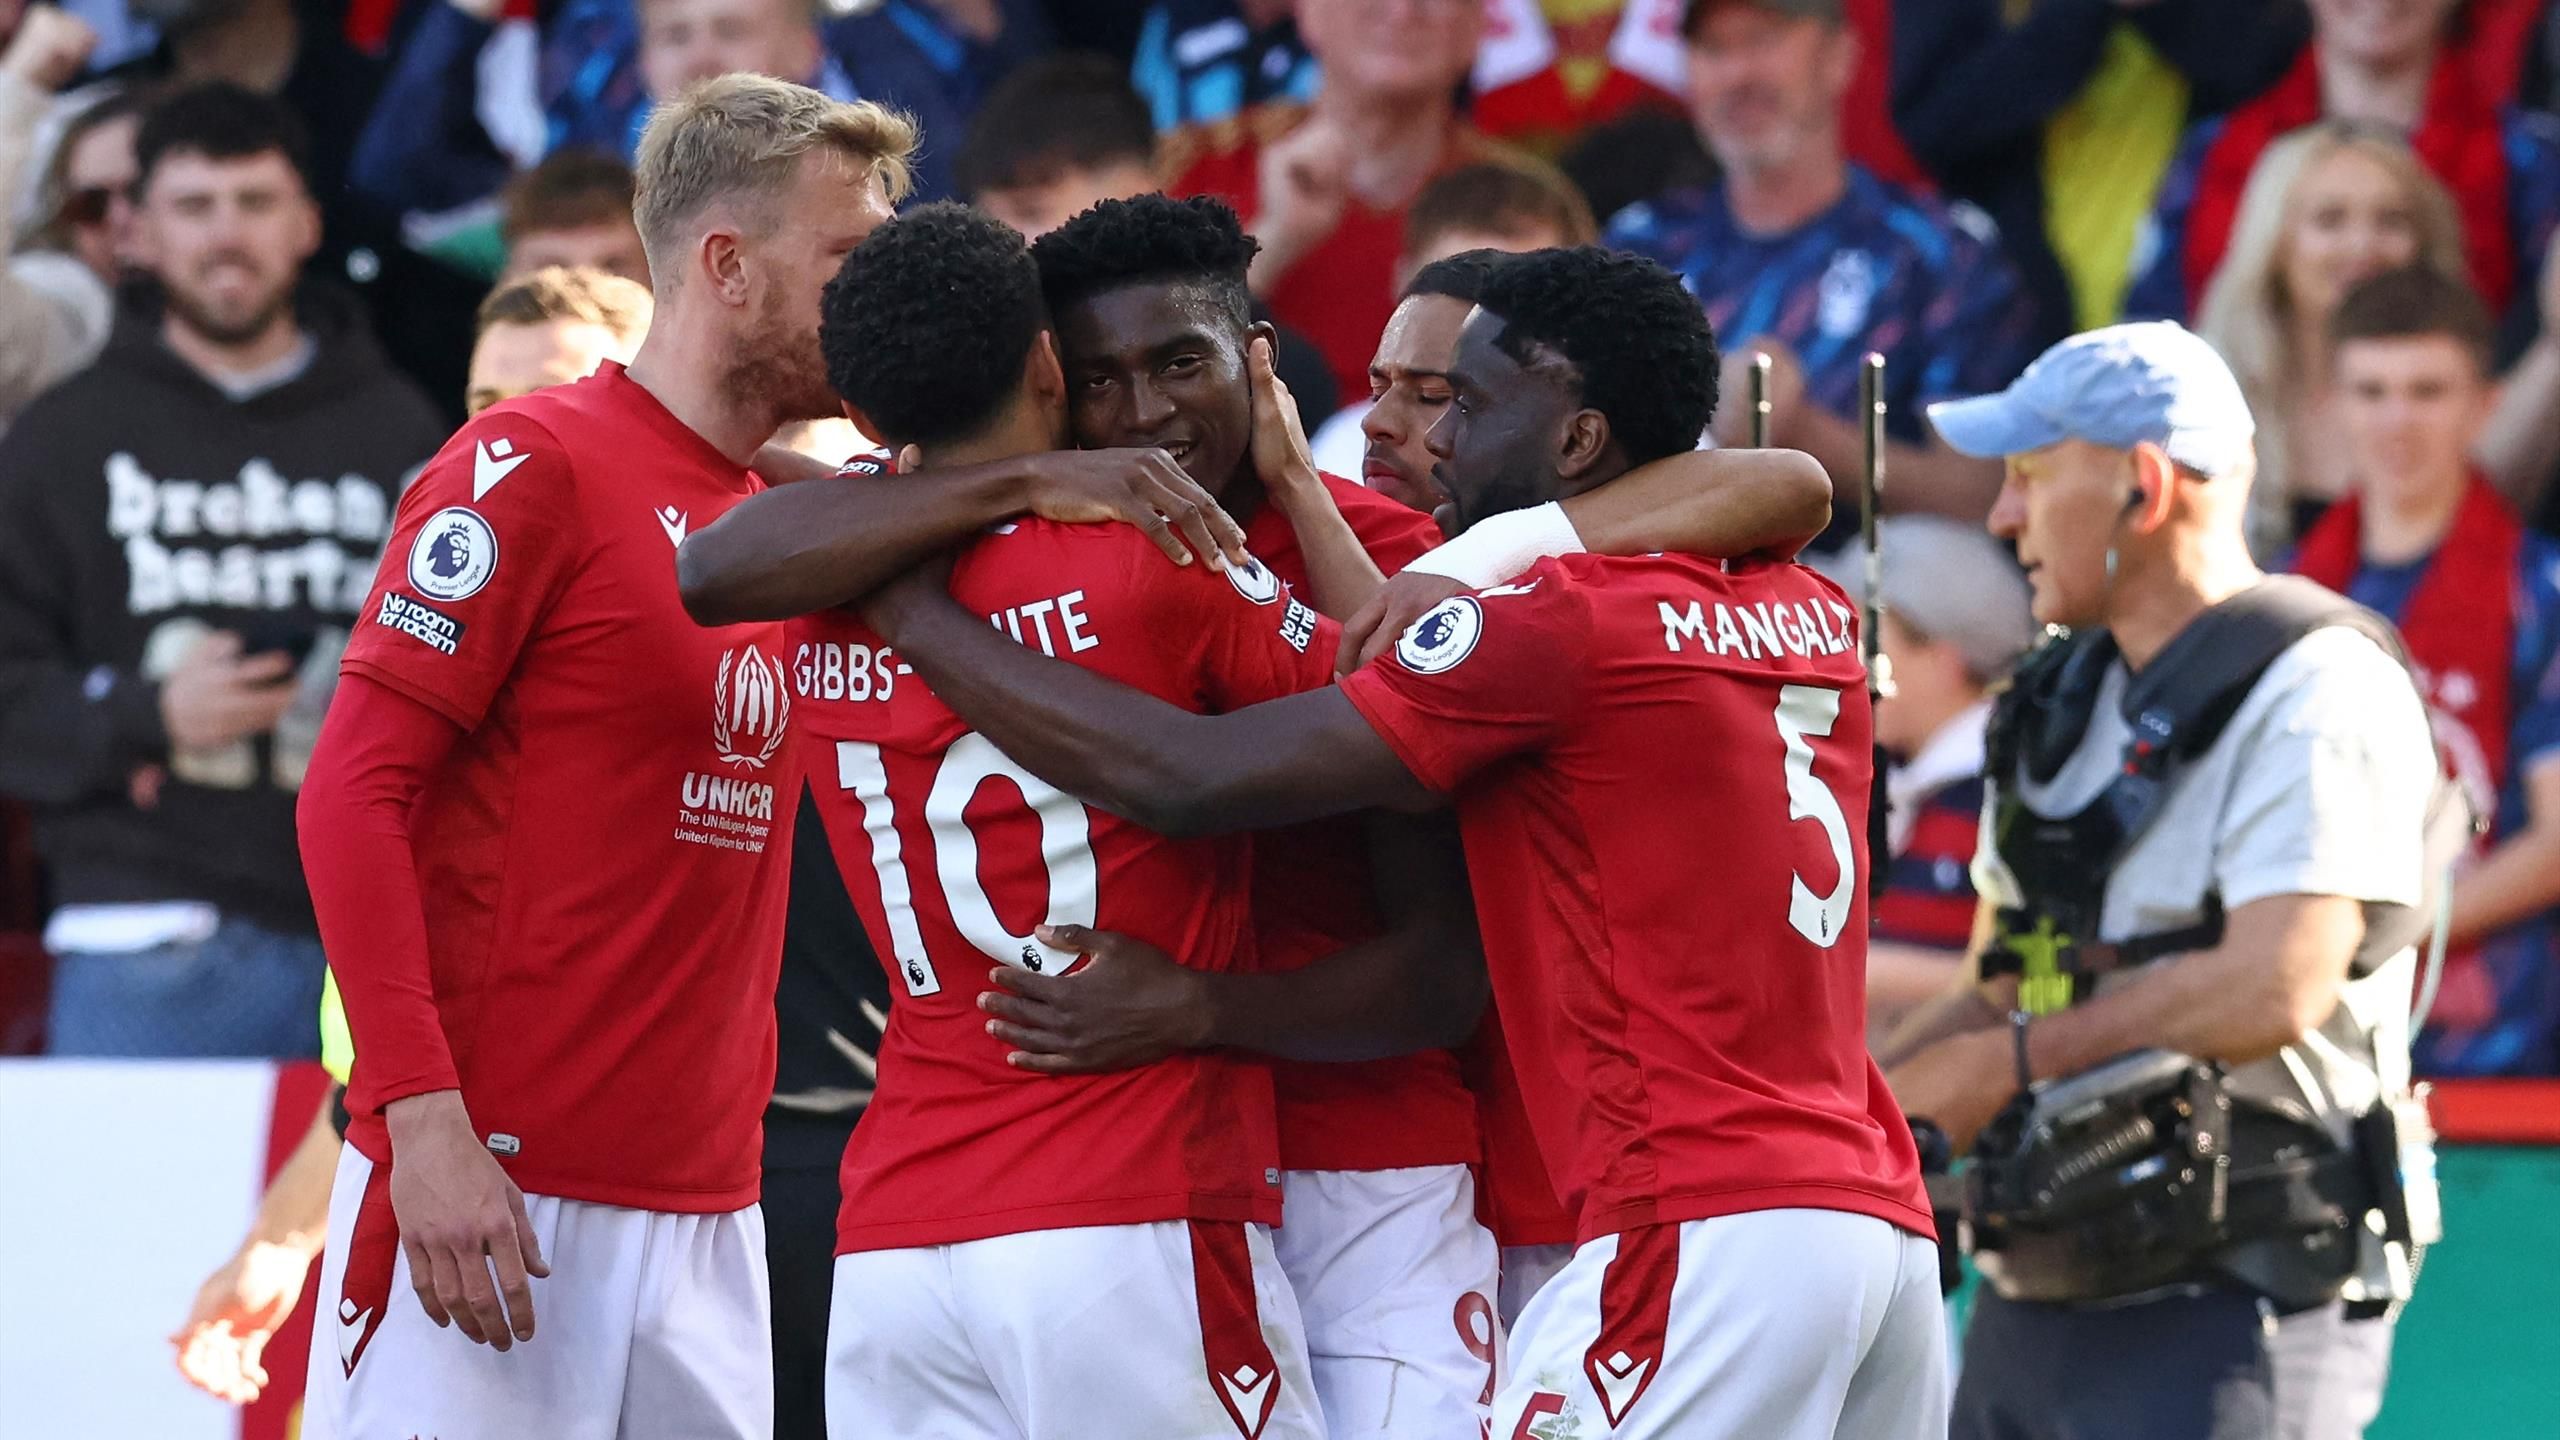 Nottingham Forest 1-0 Arsenal - Hosts end Gunners Premier League title hopes with Man City confirmed as champions